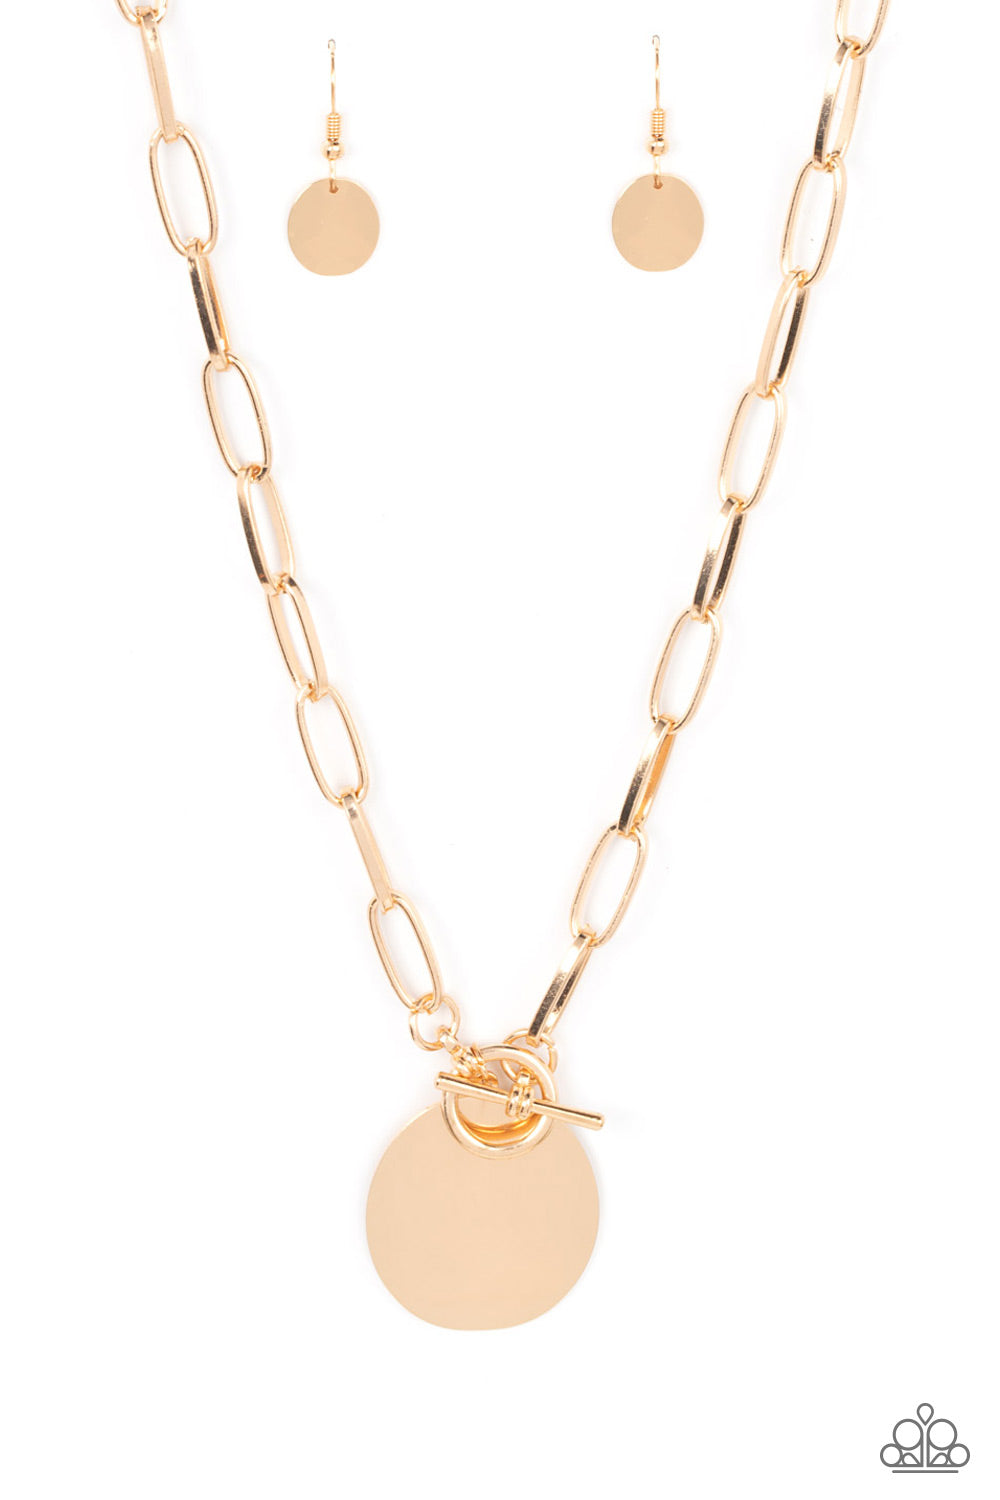 Tag Out Gold Necklace - Paparazzi Accessories  An oversized oval gold disc swings from the bottom of a substantial oval linked gold chain, resulting in a gritty industrial pendant below the collar. Features a toggle closure.  Sold as one individual necklace. Includes one pair of matching earrings.